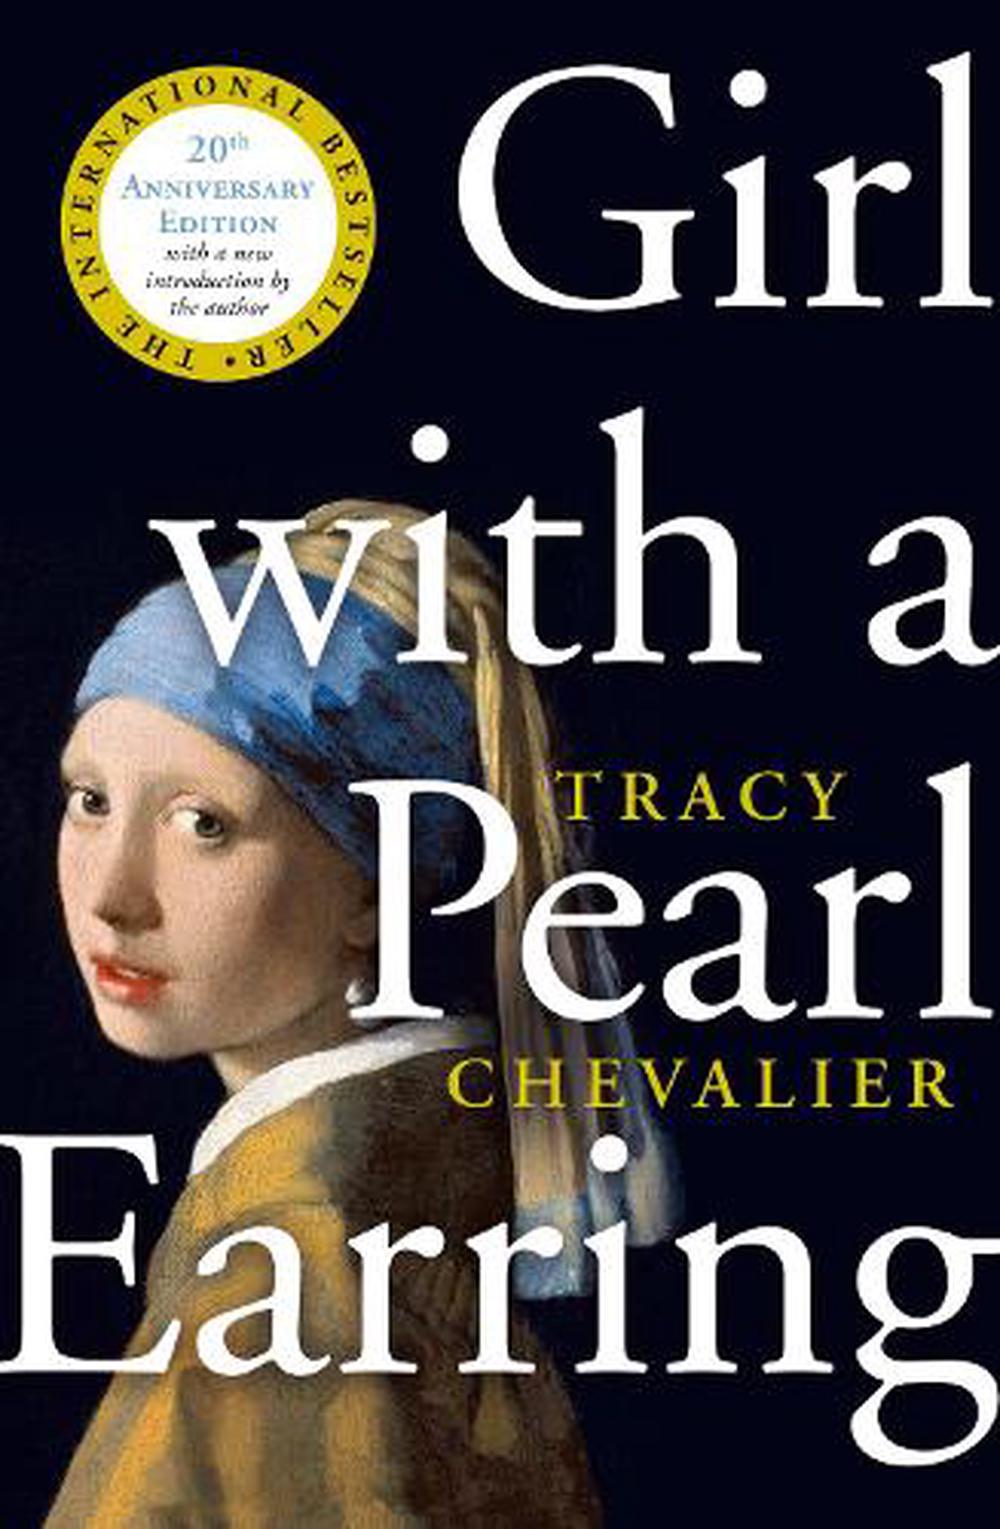 book review girl with a pearl earring